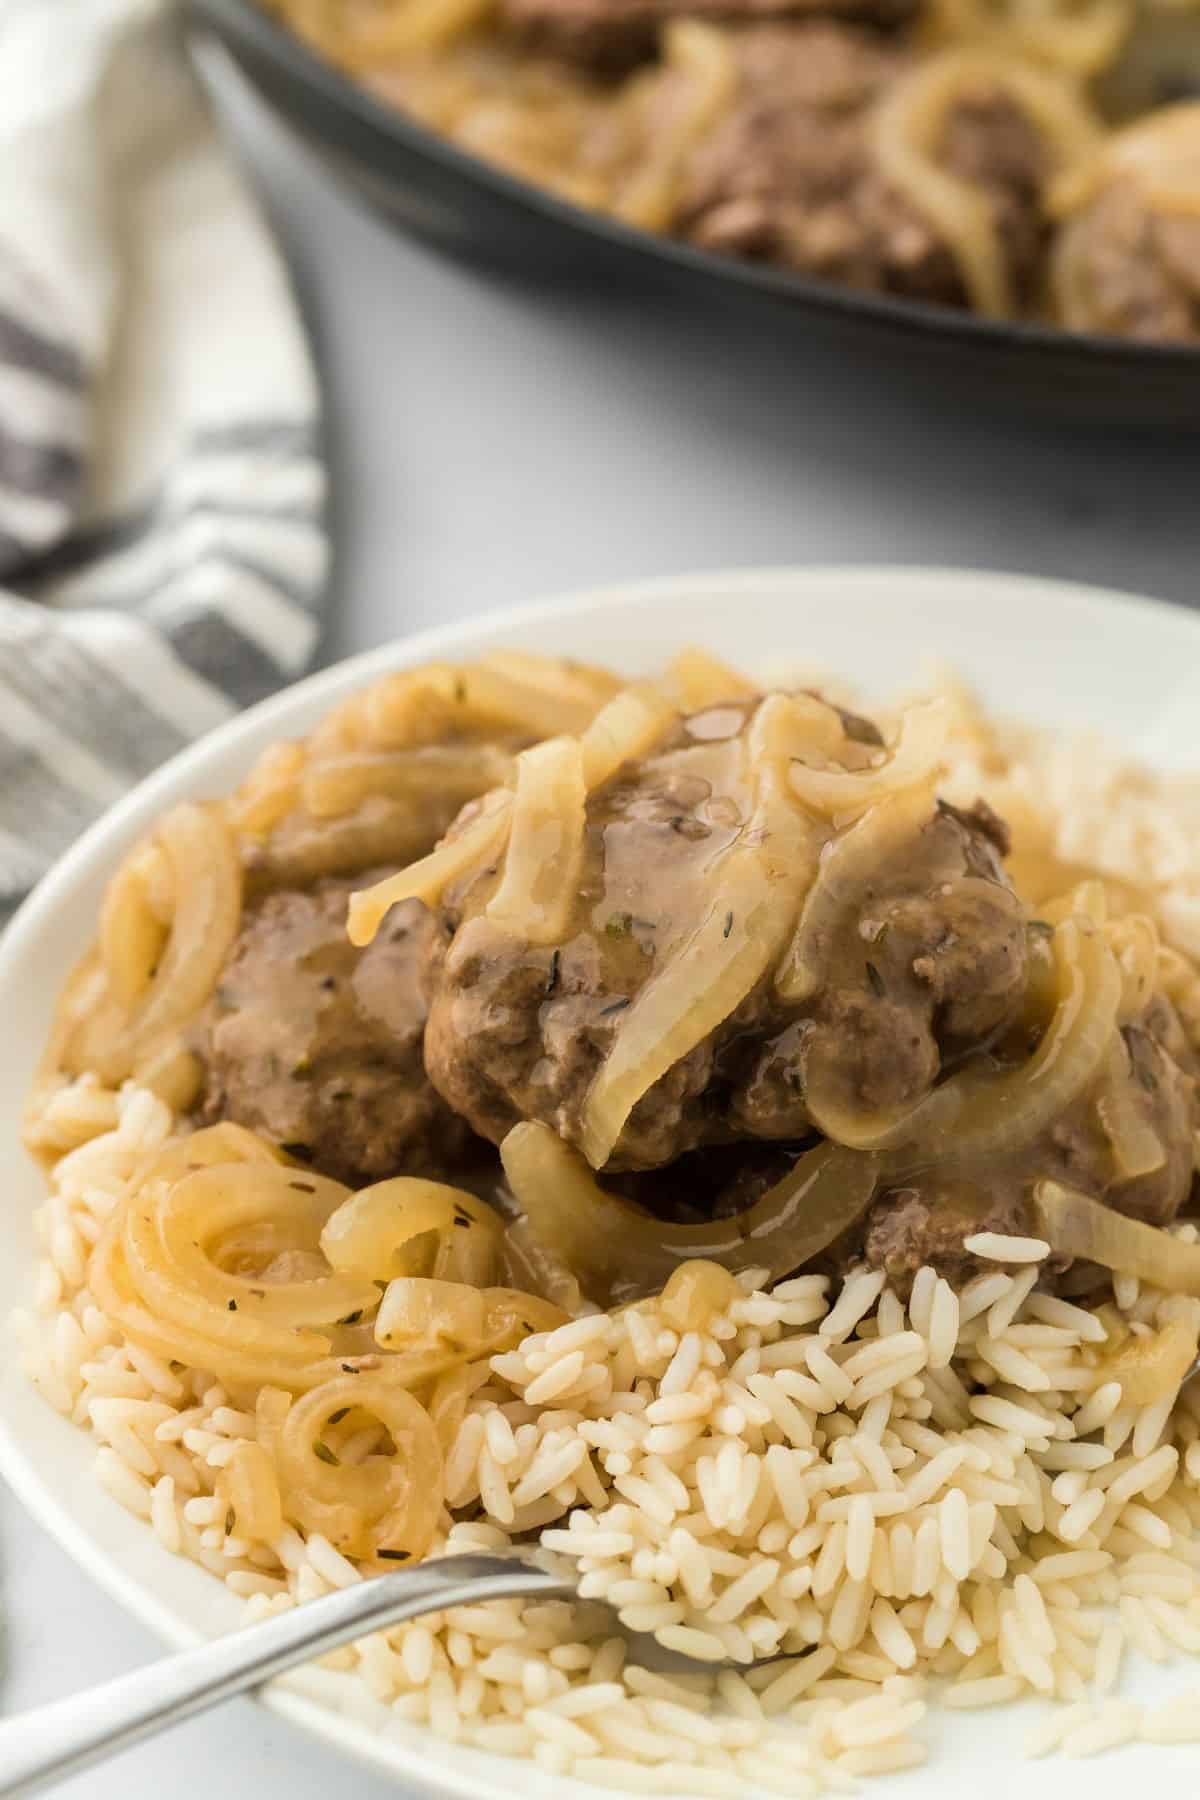 Rice topped with hamburger steaks and sautéed onions, drenched in a rich onion gravy. The dish is accompanied by a fork, and there’s a skillet and a striped towel in the background